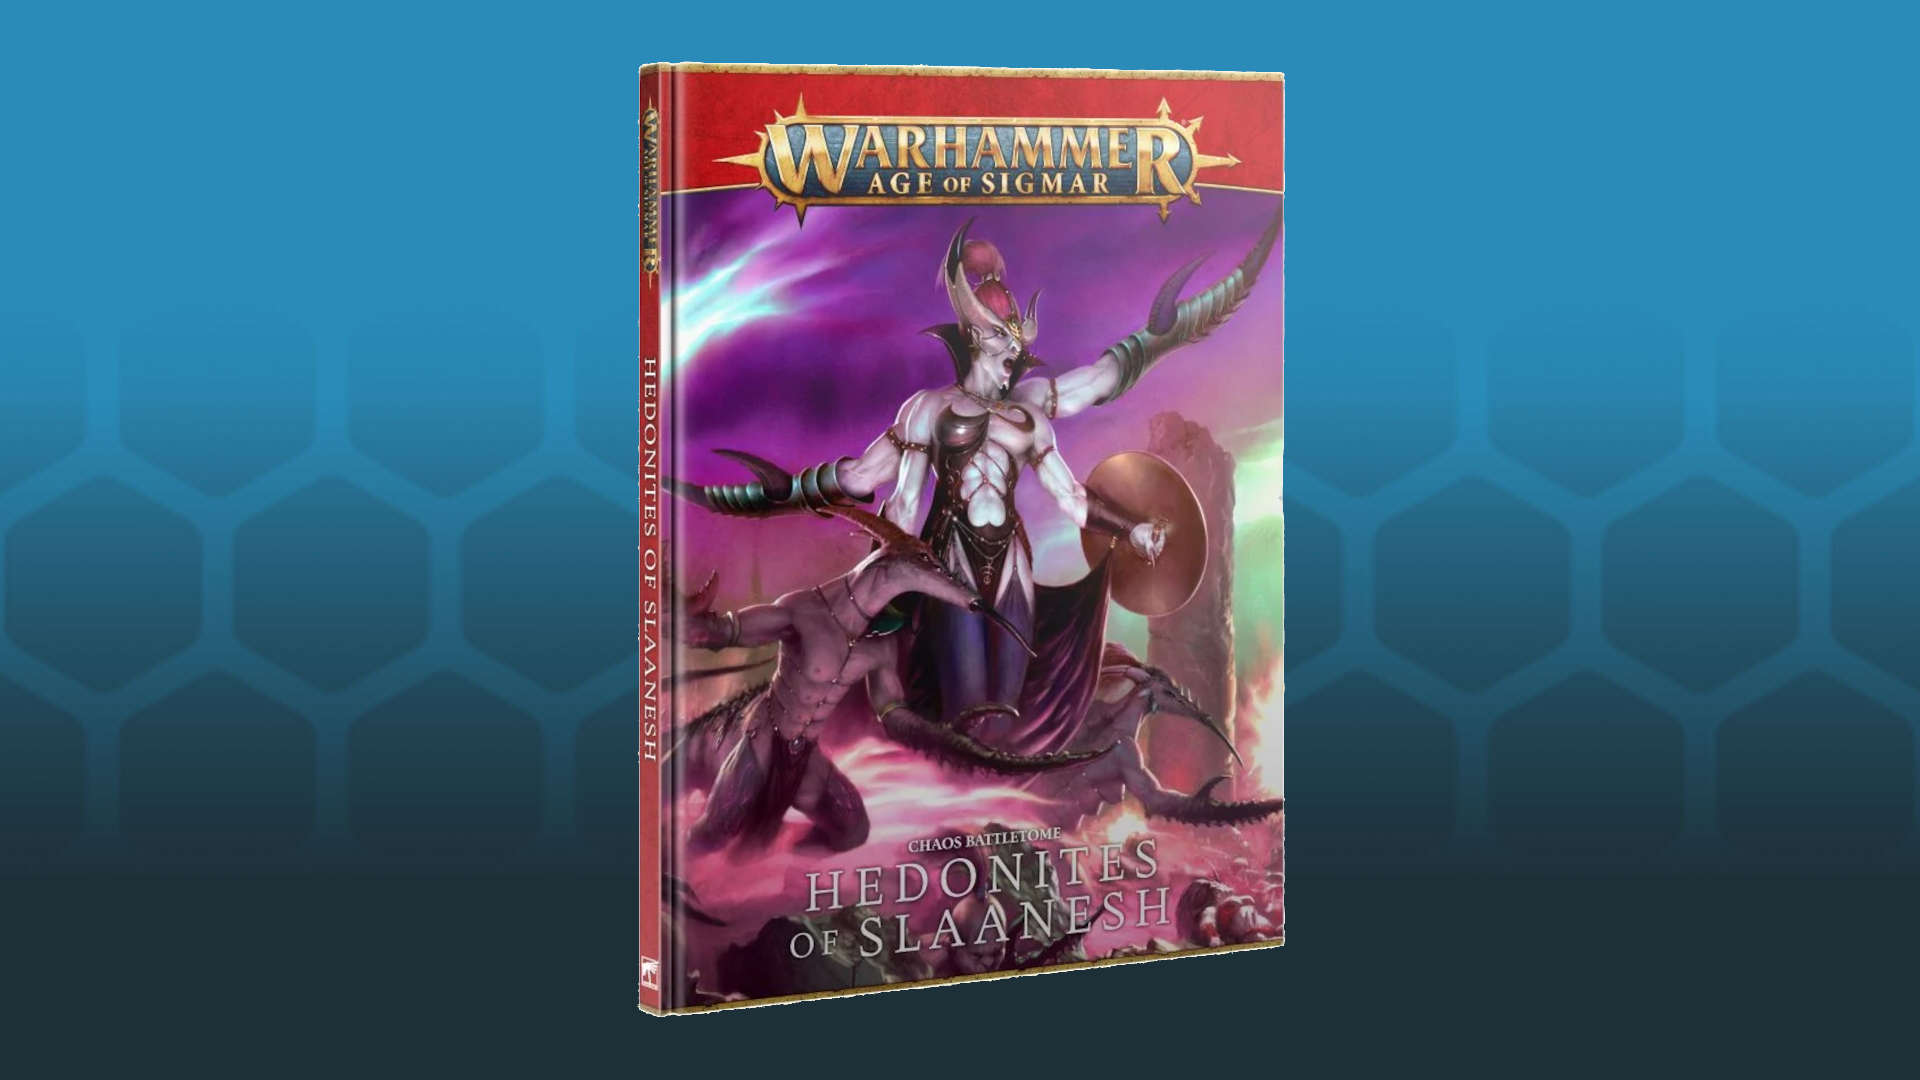 New Warhammer Slaanesh book is afraid of sex - Hedonites of Slaanesh battletome cover, showing a greater daemon of slaanesh